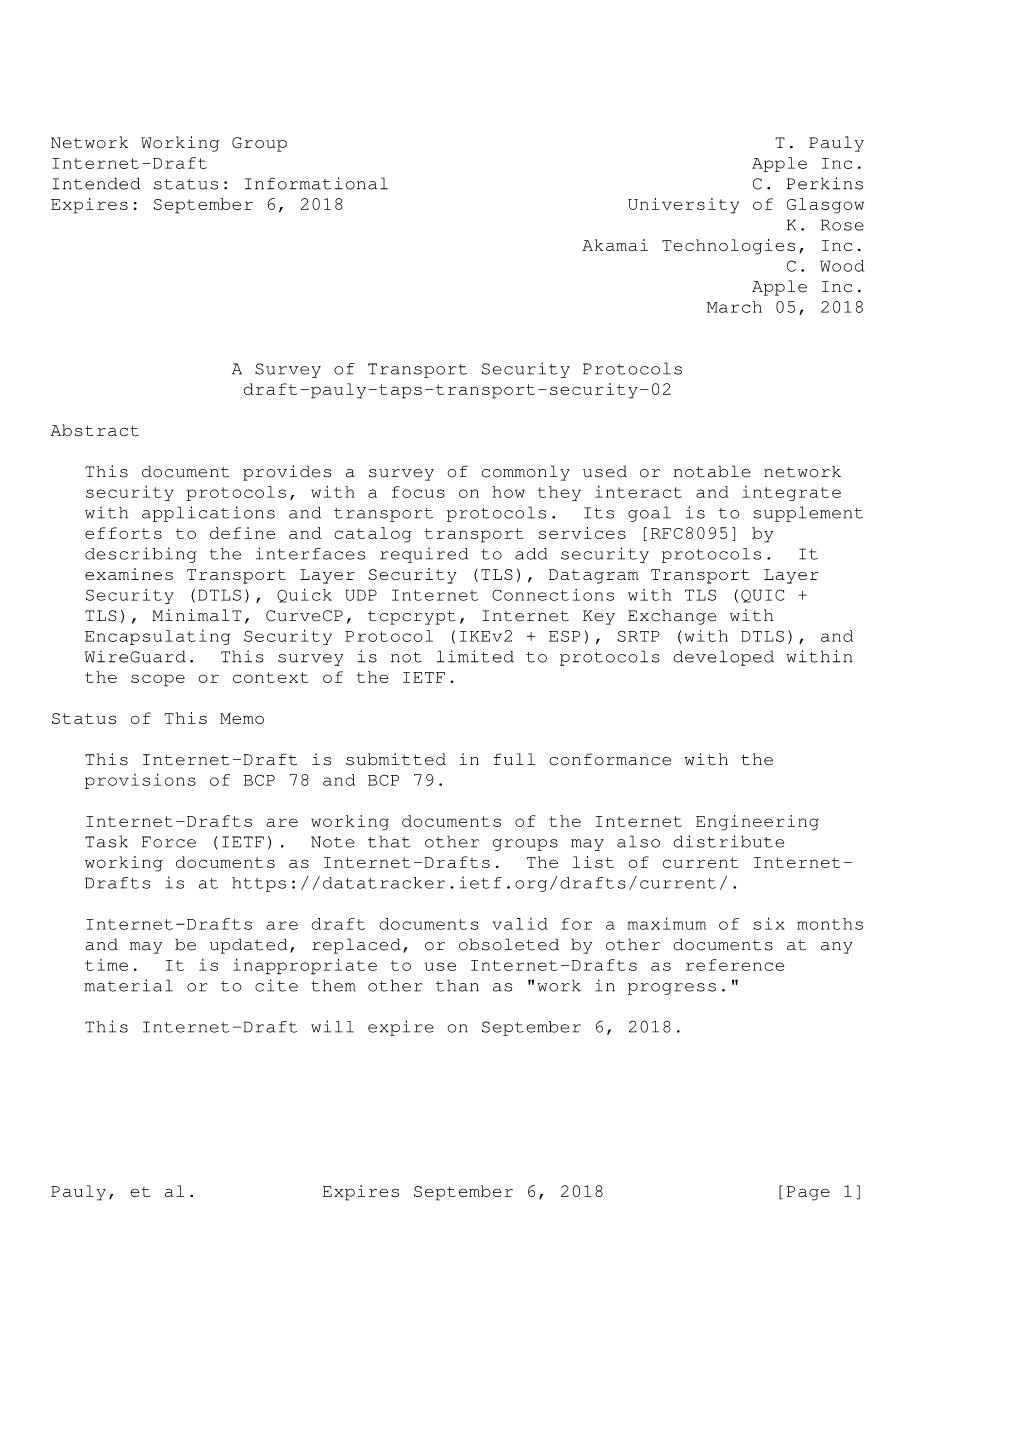 Network Working Group T. Pauly Internet-Draft Apple Inc